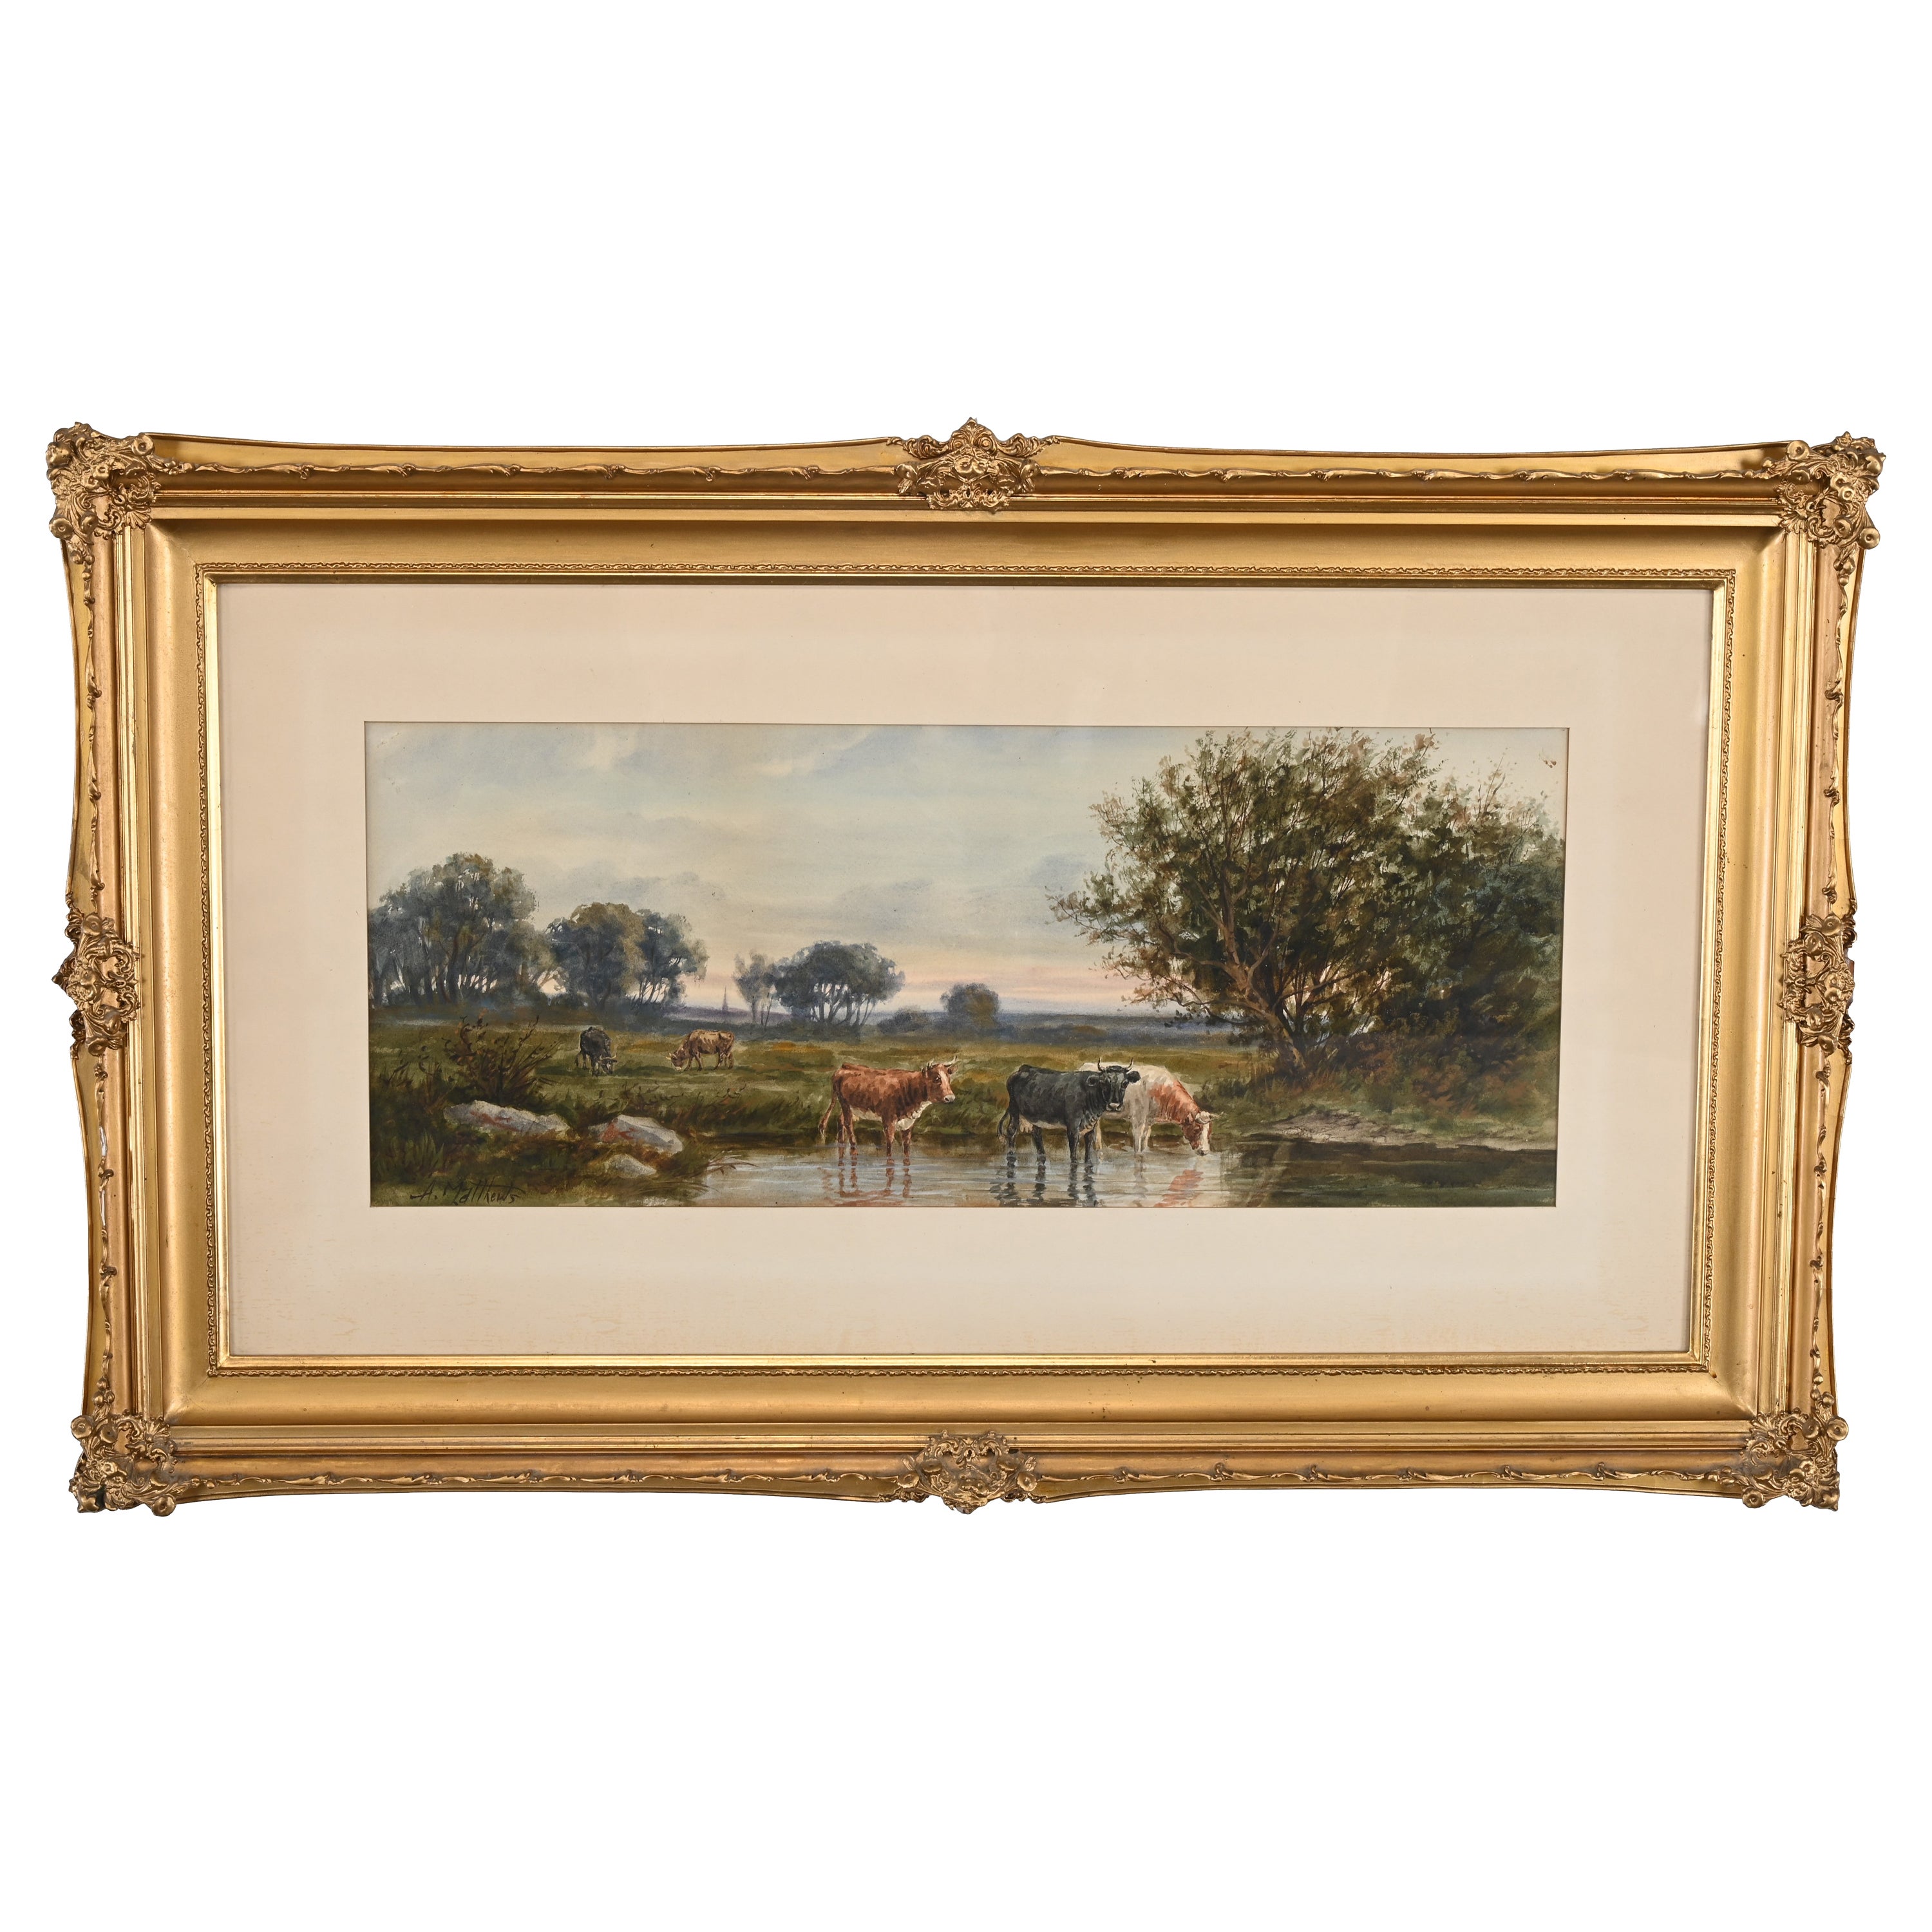 Watercolor Painting of a Landscape with Cattle Watering by A. Matthews